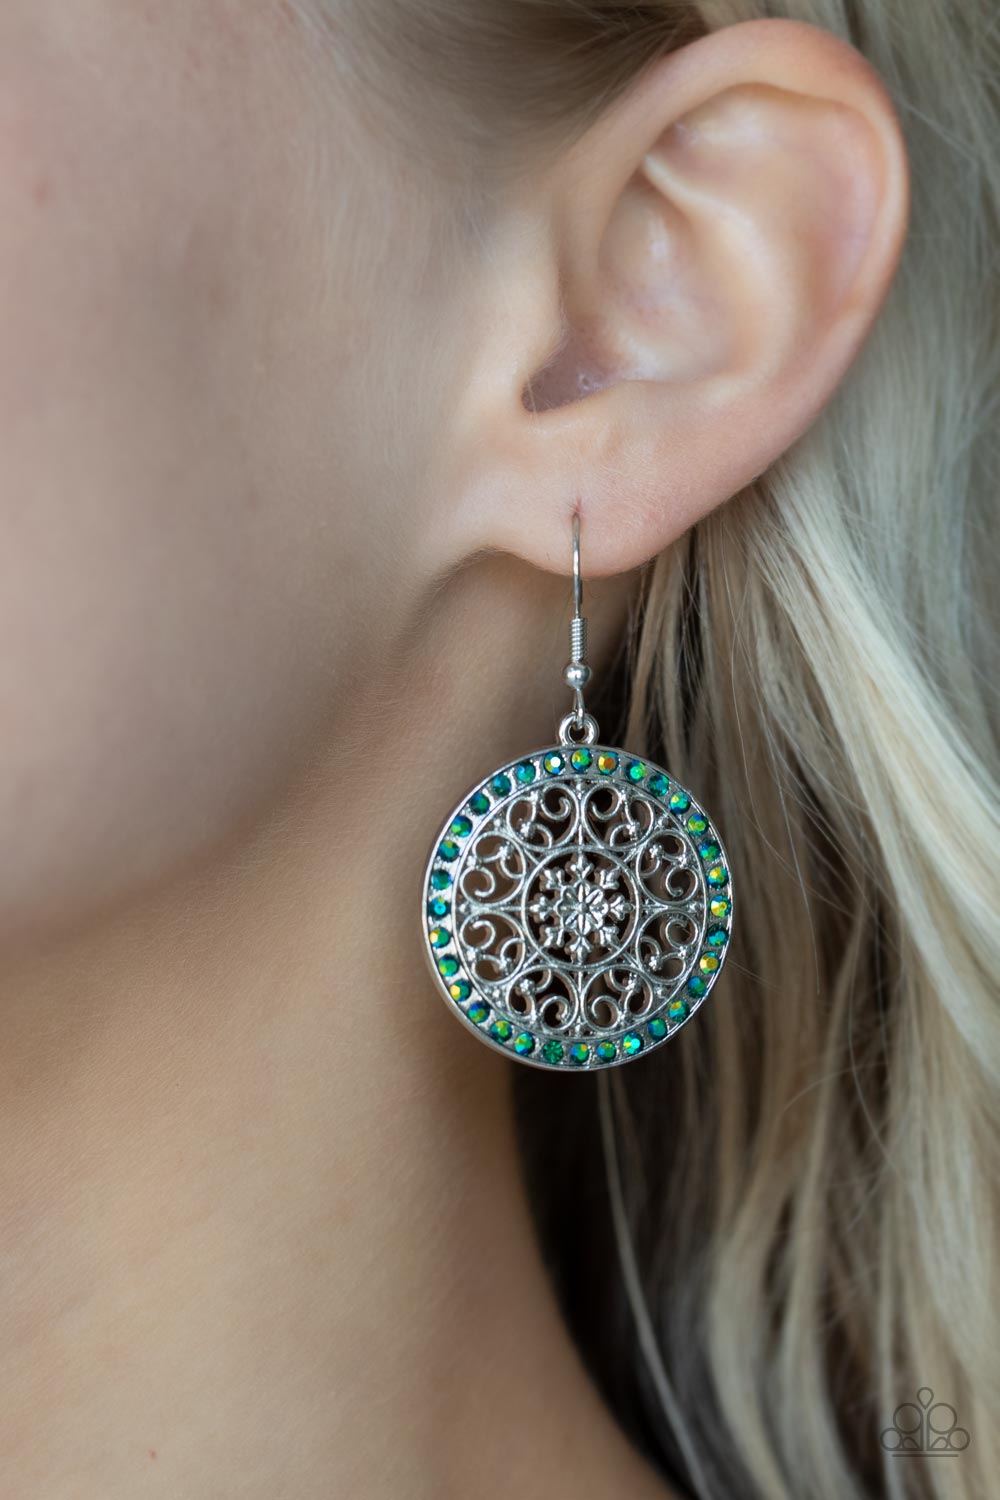 Bollywood Ballroom - Green Iridescent Earrings infused with a border of iridescent green rhinestones, studded silver heart shape filigree fans out from a decorative silver floral center for a whimsical look. Earring attaches to a standard fishhook fitting.  Sold as one pair of earrings.  Paparazzi Jewelry is lead and nickel free so it's perfect for sensitive skin too!